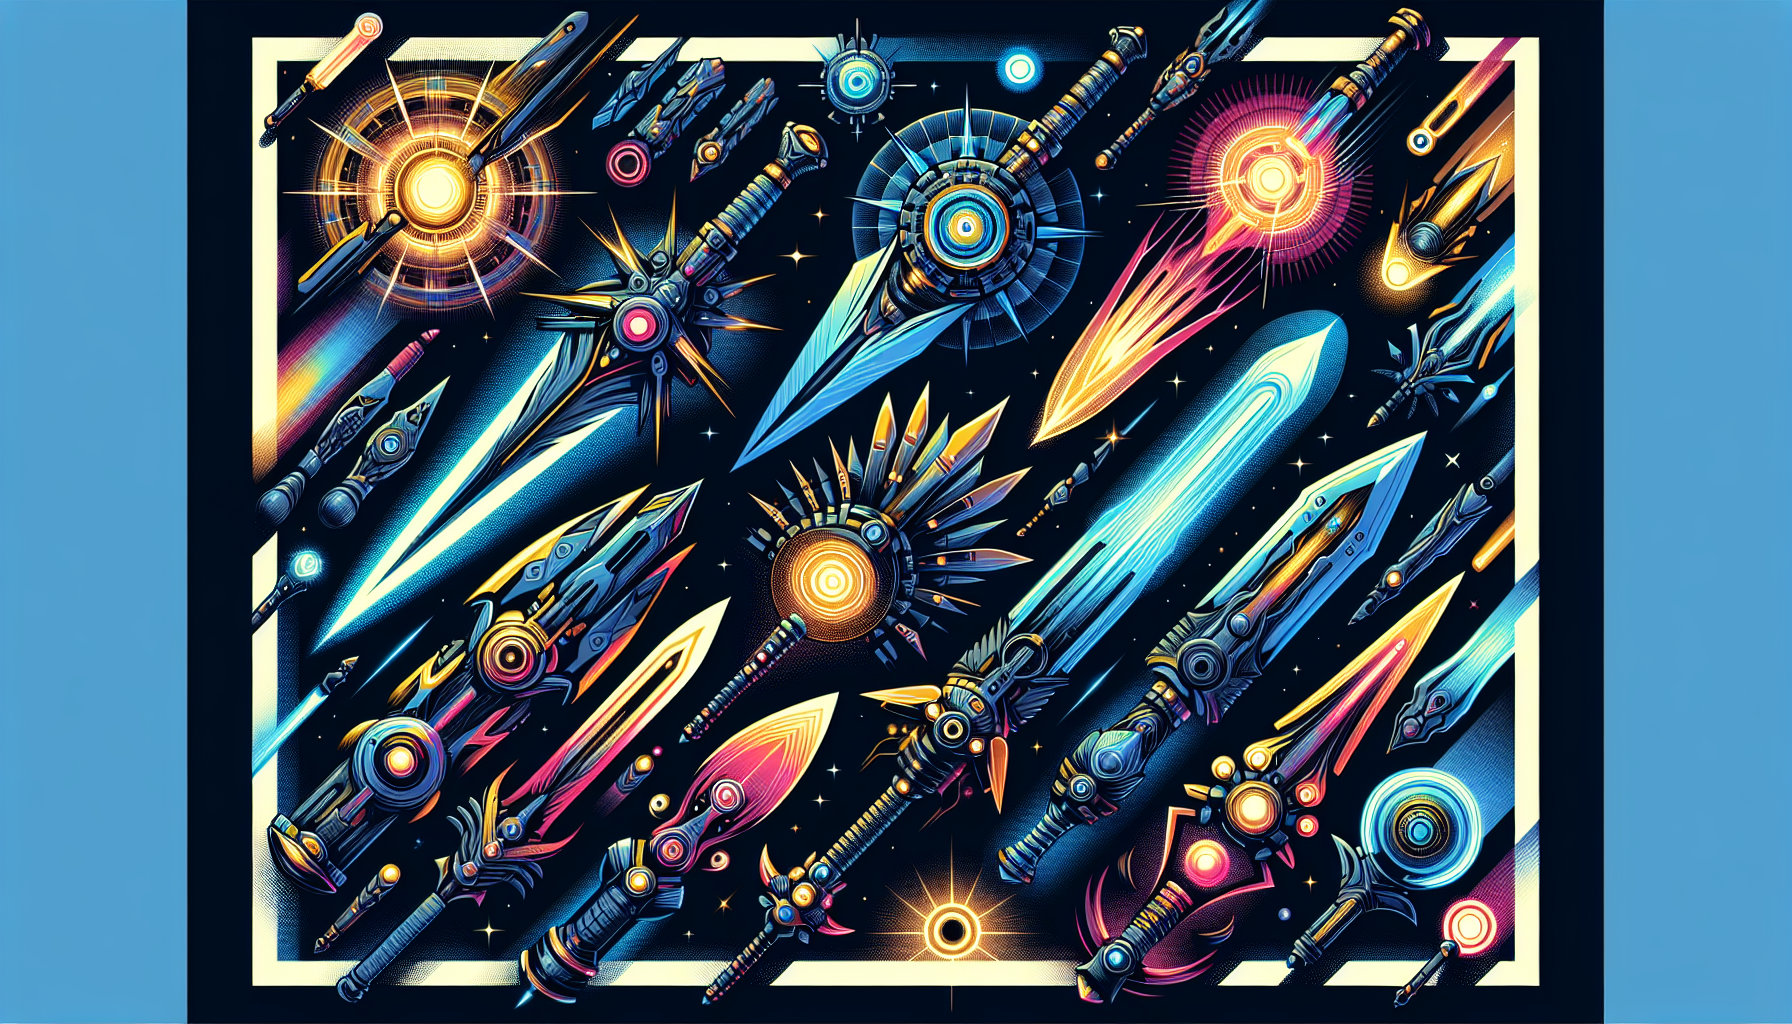 Create a vivid and contemporary illustration showcasing a variety of futuristic energy swords. These swords should encapsulate an array of designs, similar to ones found in space opera science fiction settings, and they should radiate different vibrant hues. Please do acknowledge the aesthetics and visuals of popular intergalactic franchises for inspiration but make it original and unique.